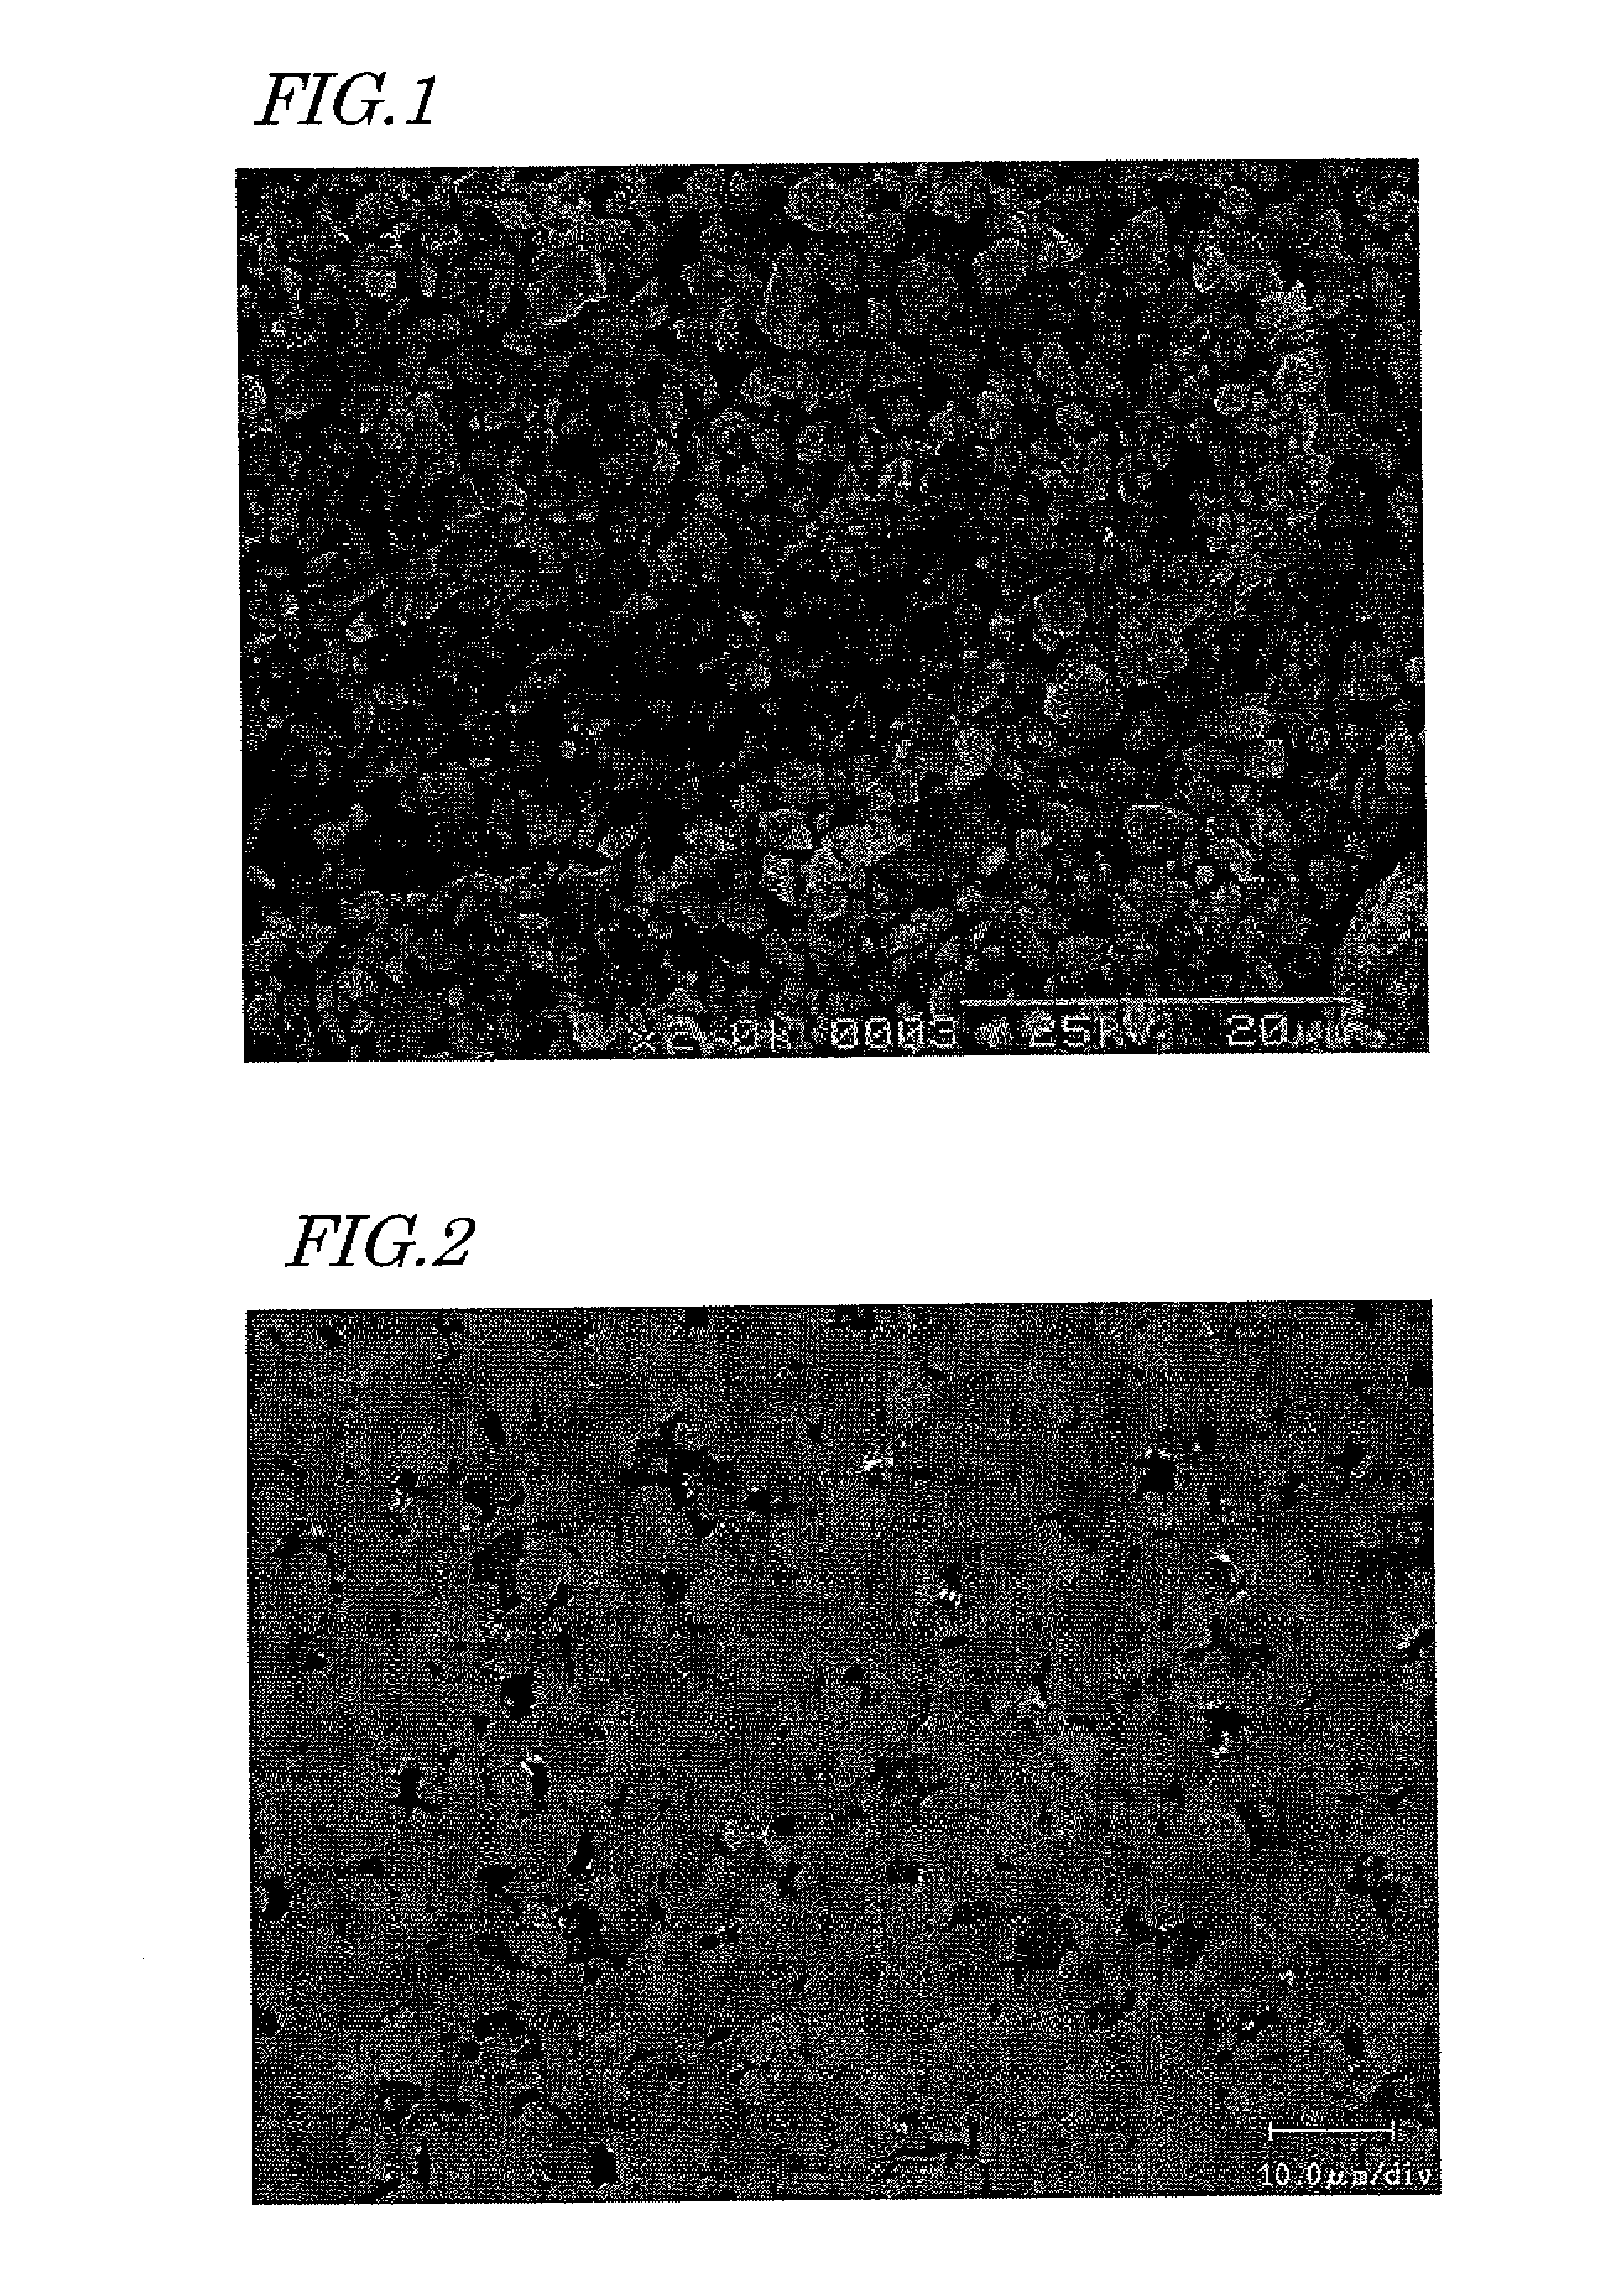 R-t-b-type sintered magnet and method for production thereof